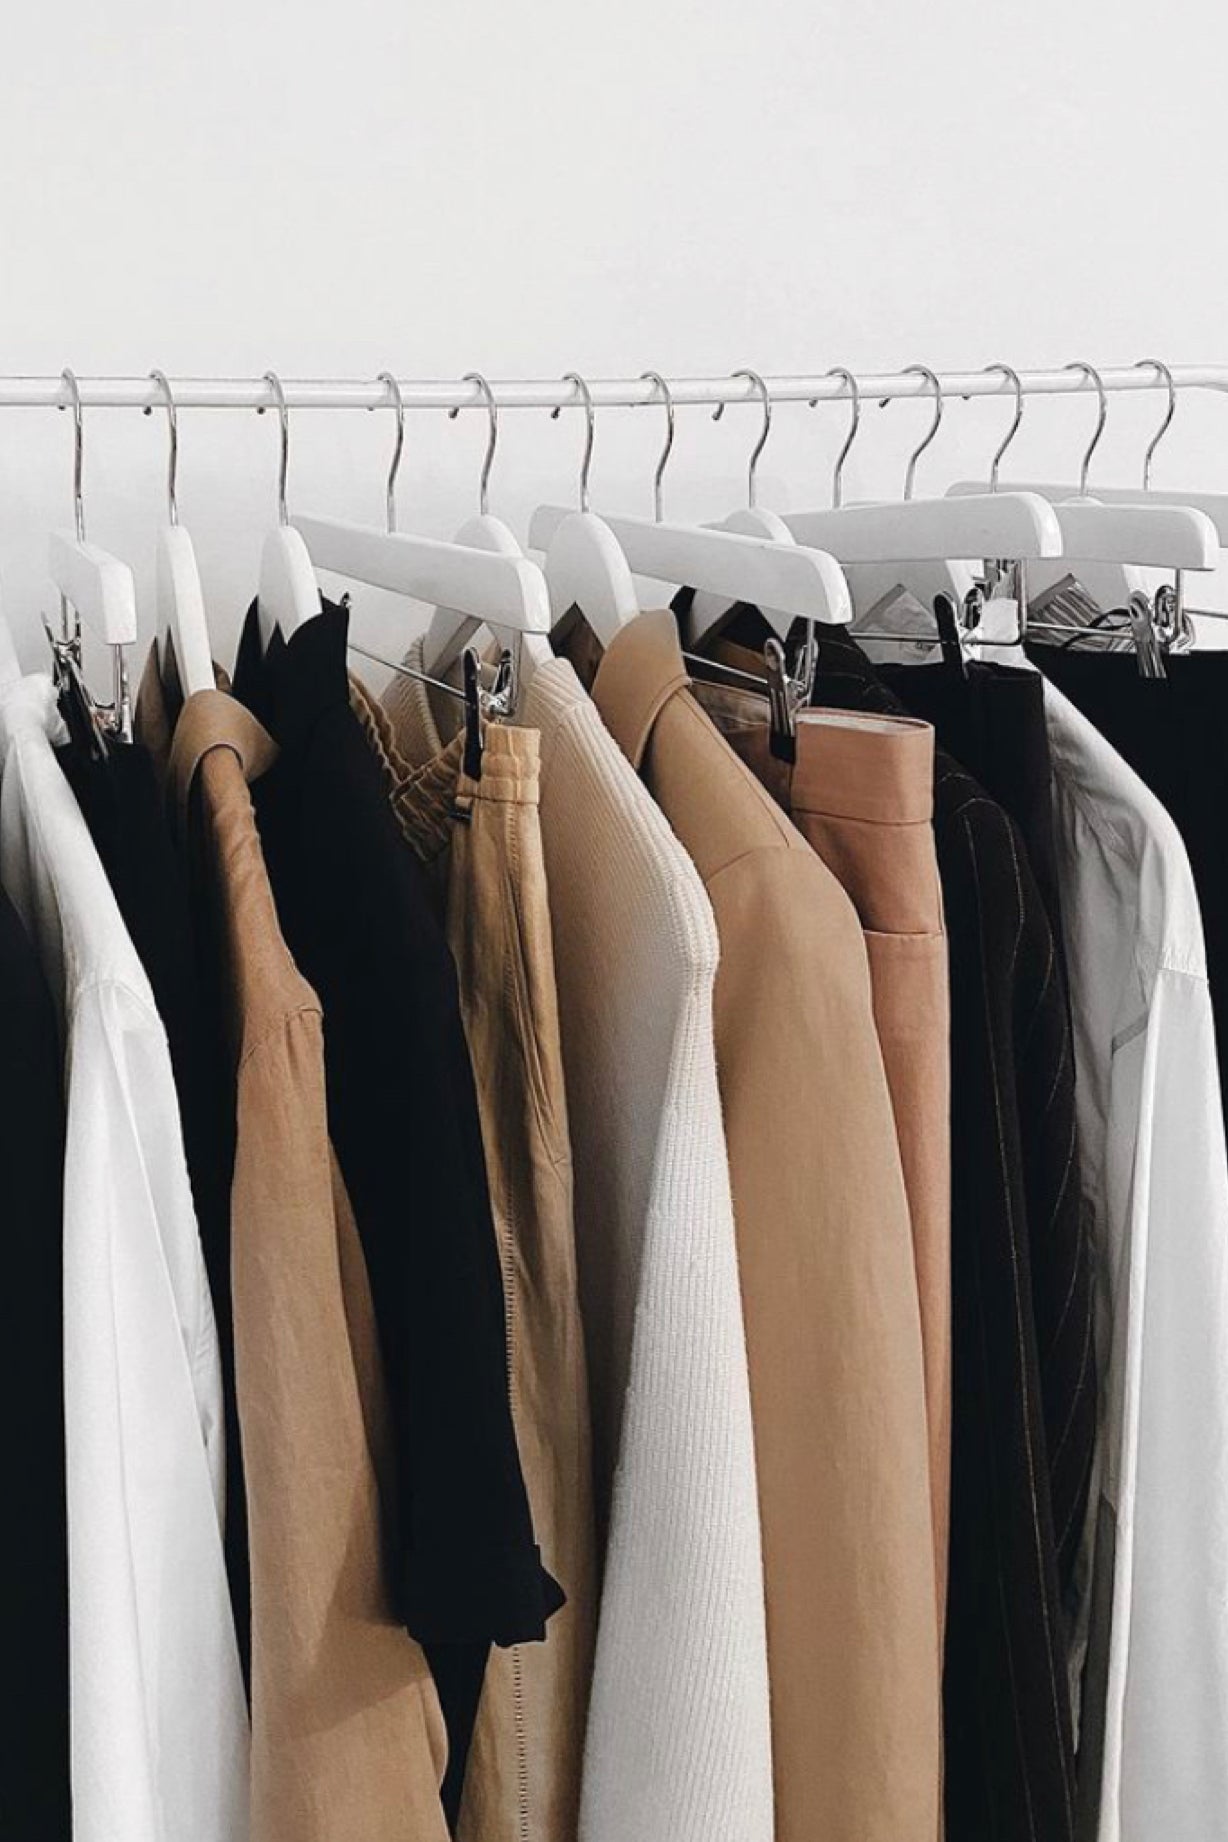 How To Organise A Wardrobe